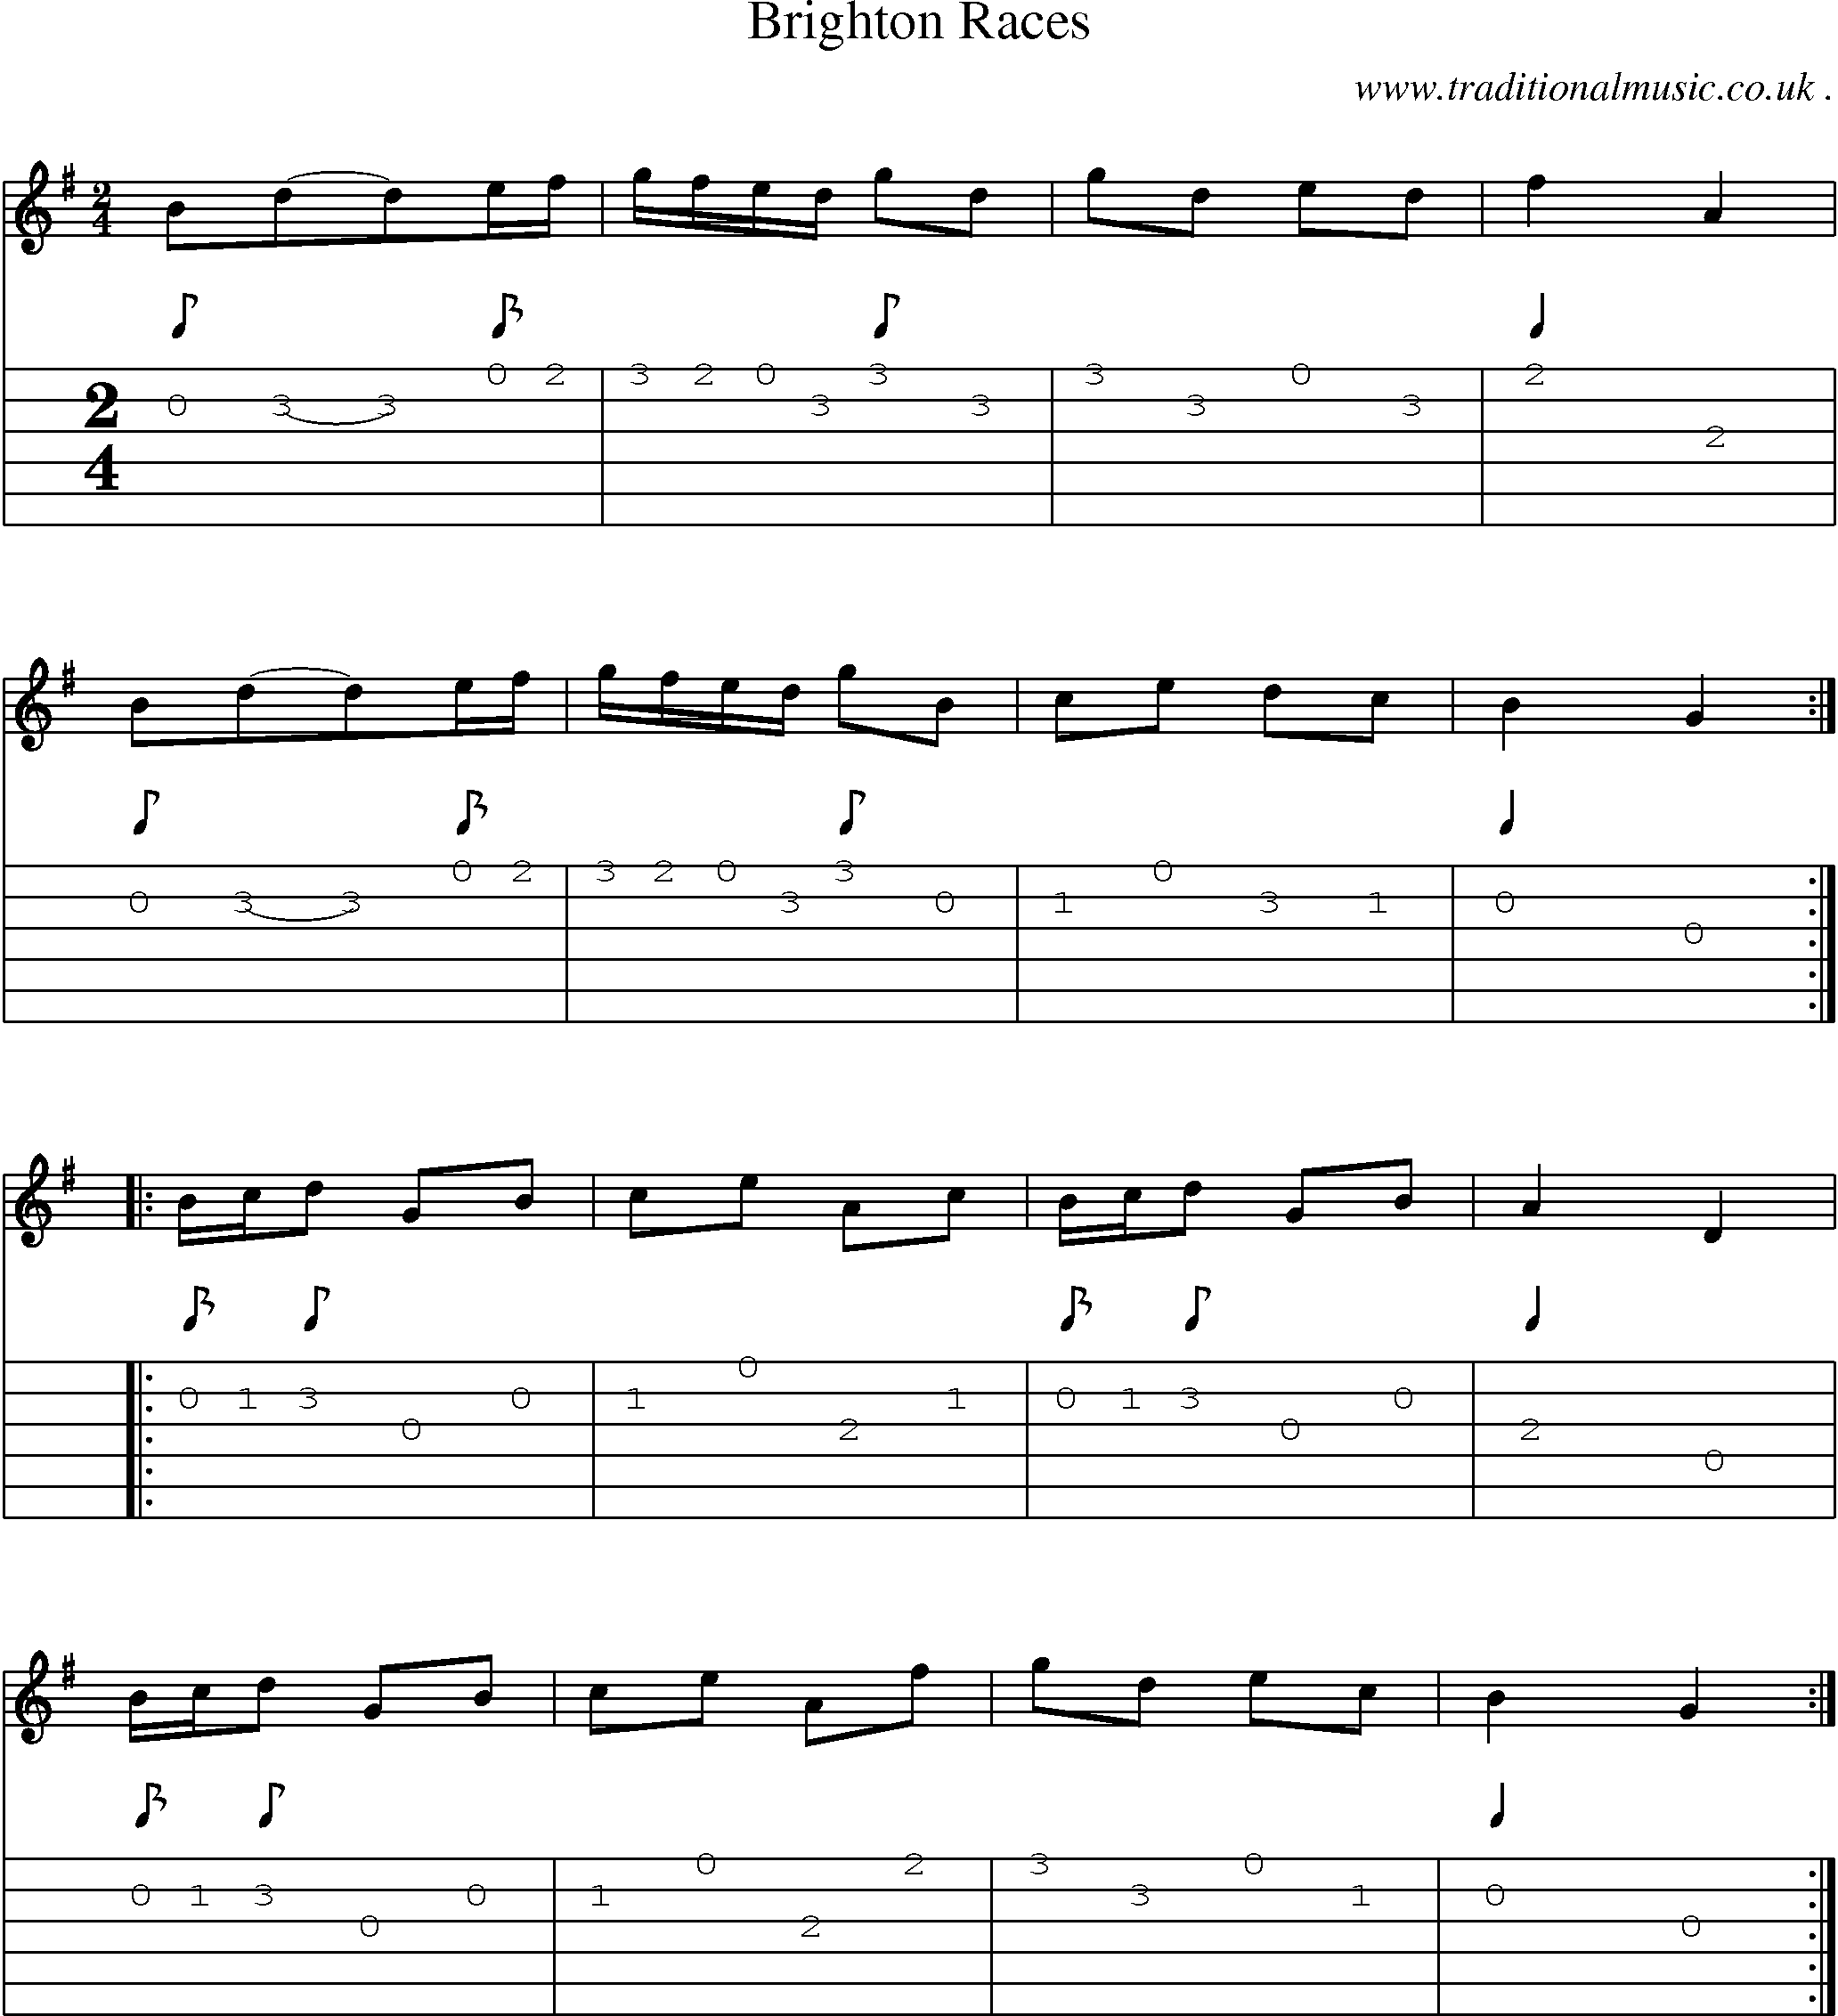 Sheet-Music and Guitar Tabs for Brighton Races